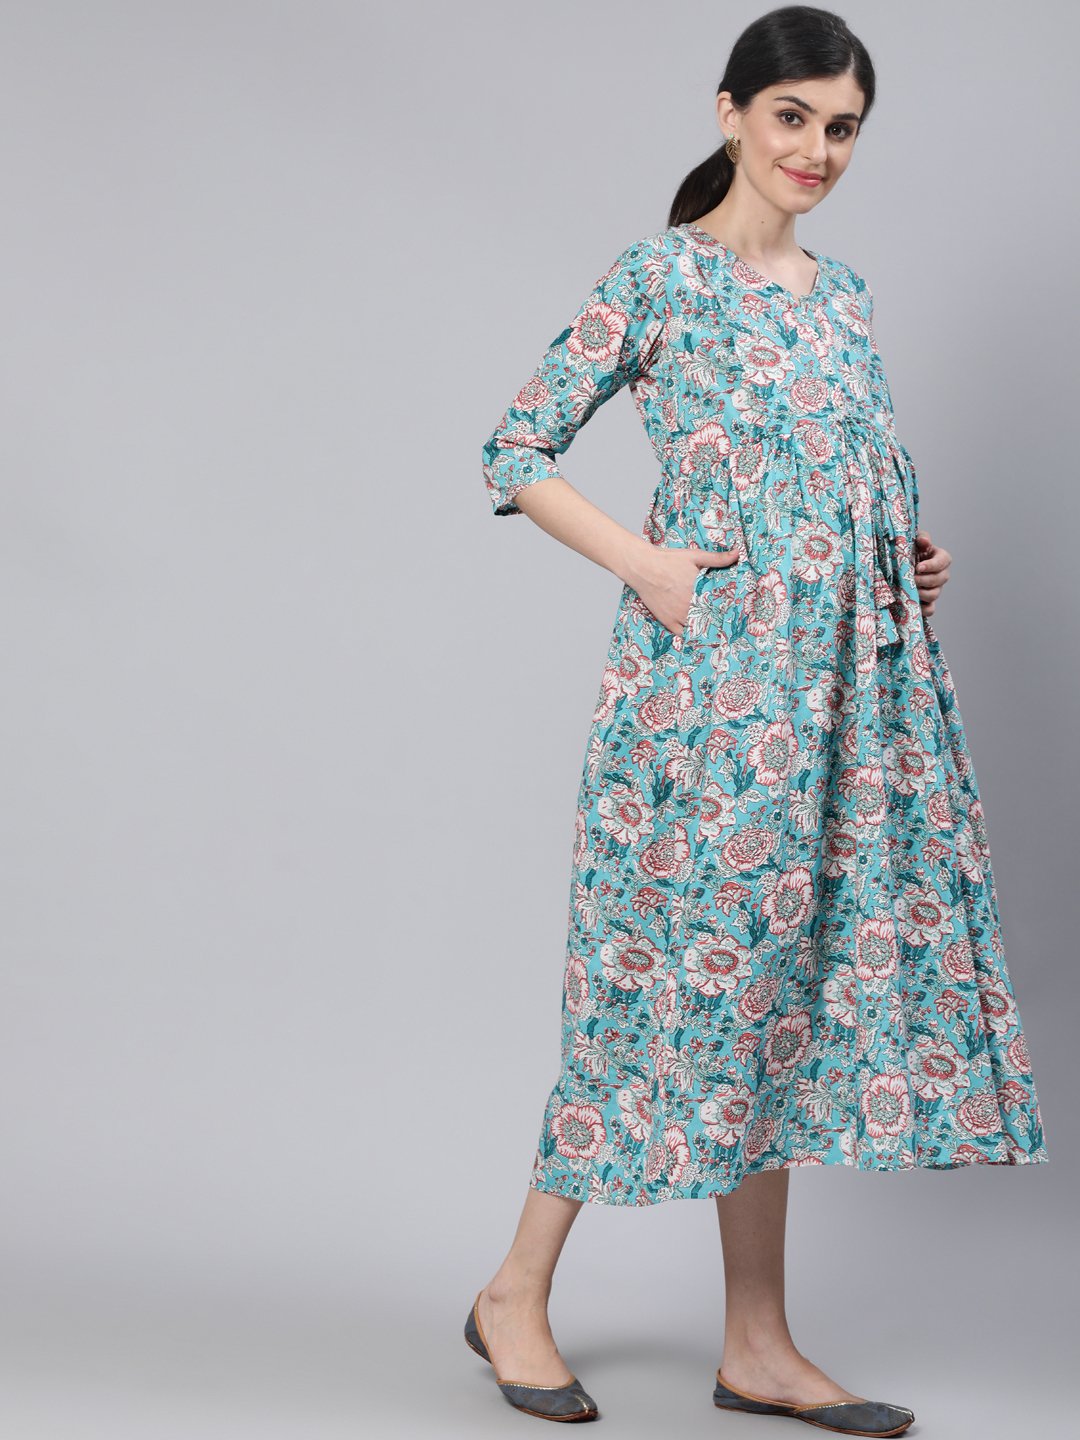 Women's Blue Floral Printed Maternity Dress With Three Quarter Sleeves - Nayo Clothing